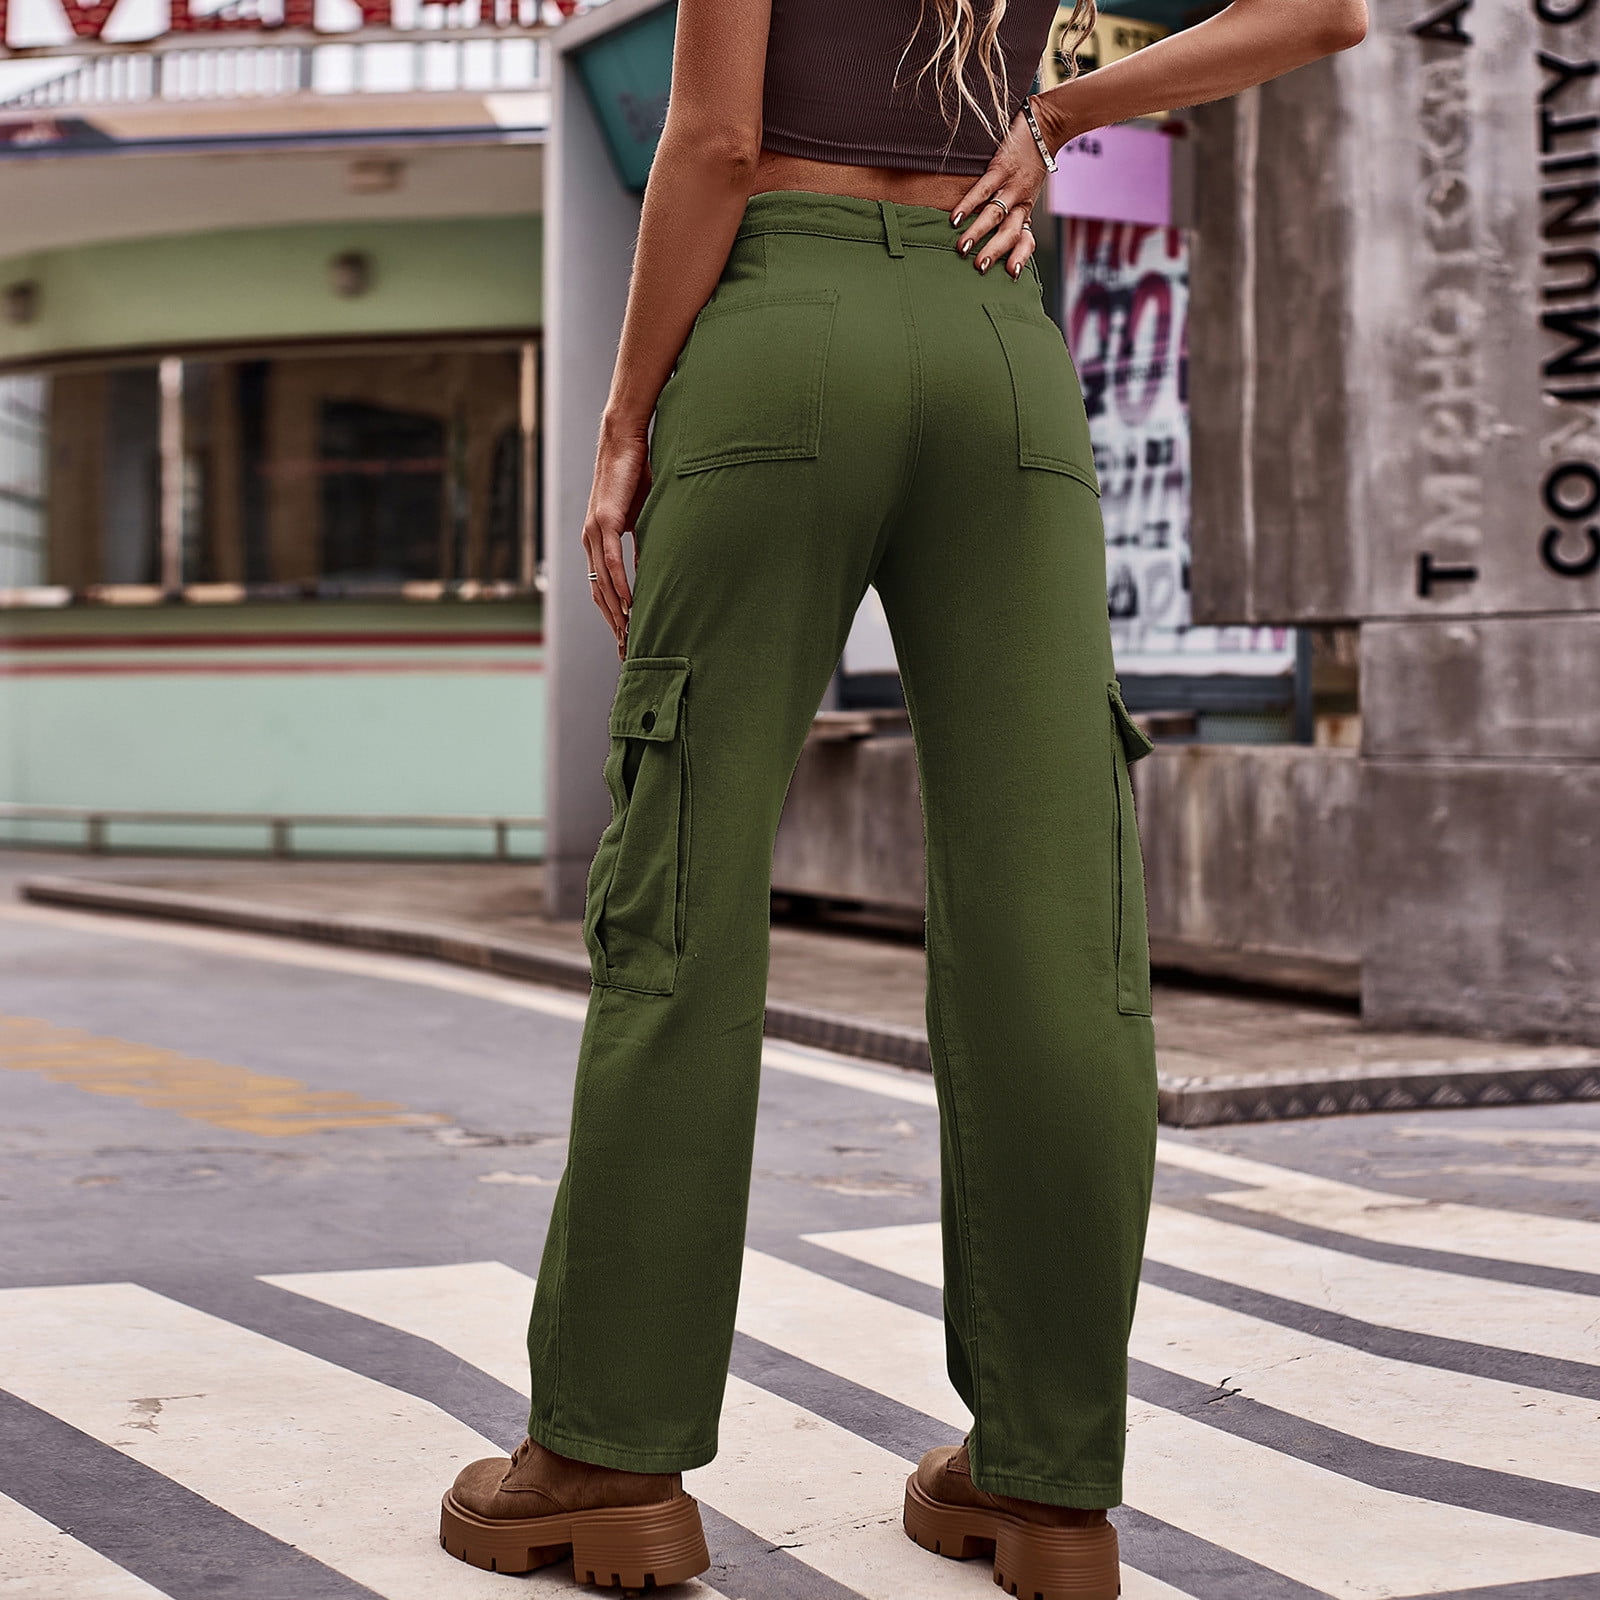 SELONE Cargo Pants Women High Waist With Pockets Denim Casual Long Pant  Straight Leg Solid Pants Hippie Punk Trousers Jogger Loose Overalls s for  Everyday Wear Running Work Casual Event Army Green